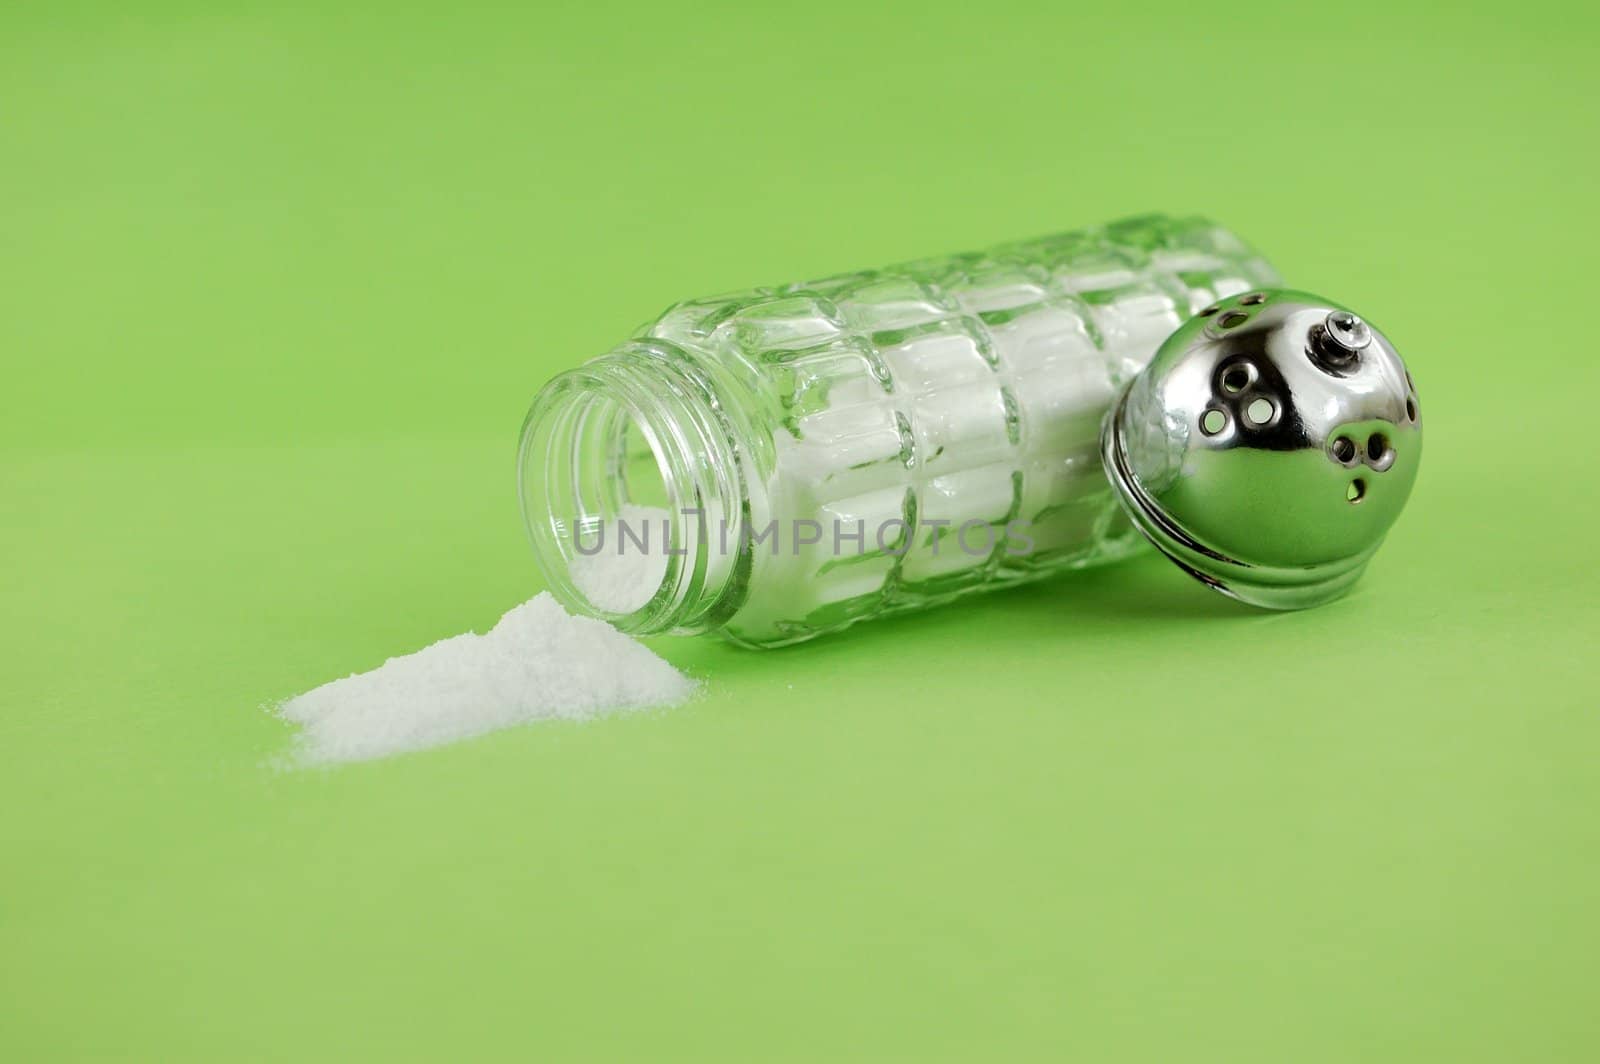 Salt poured out of glass shaker on green background.